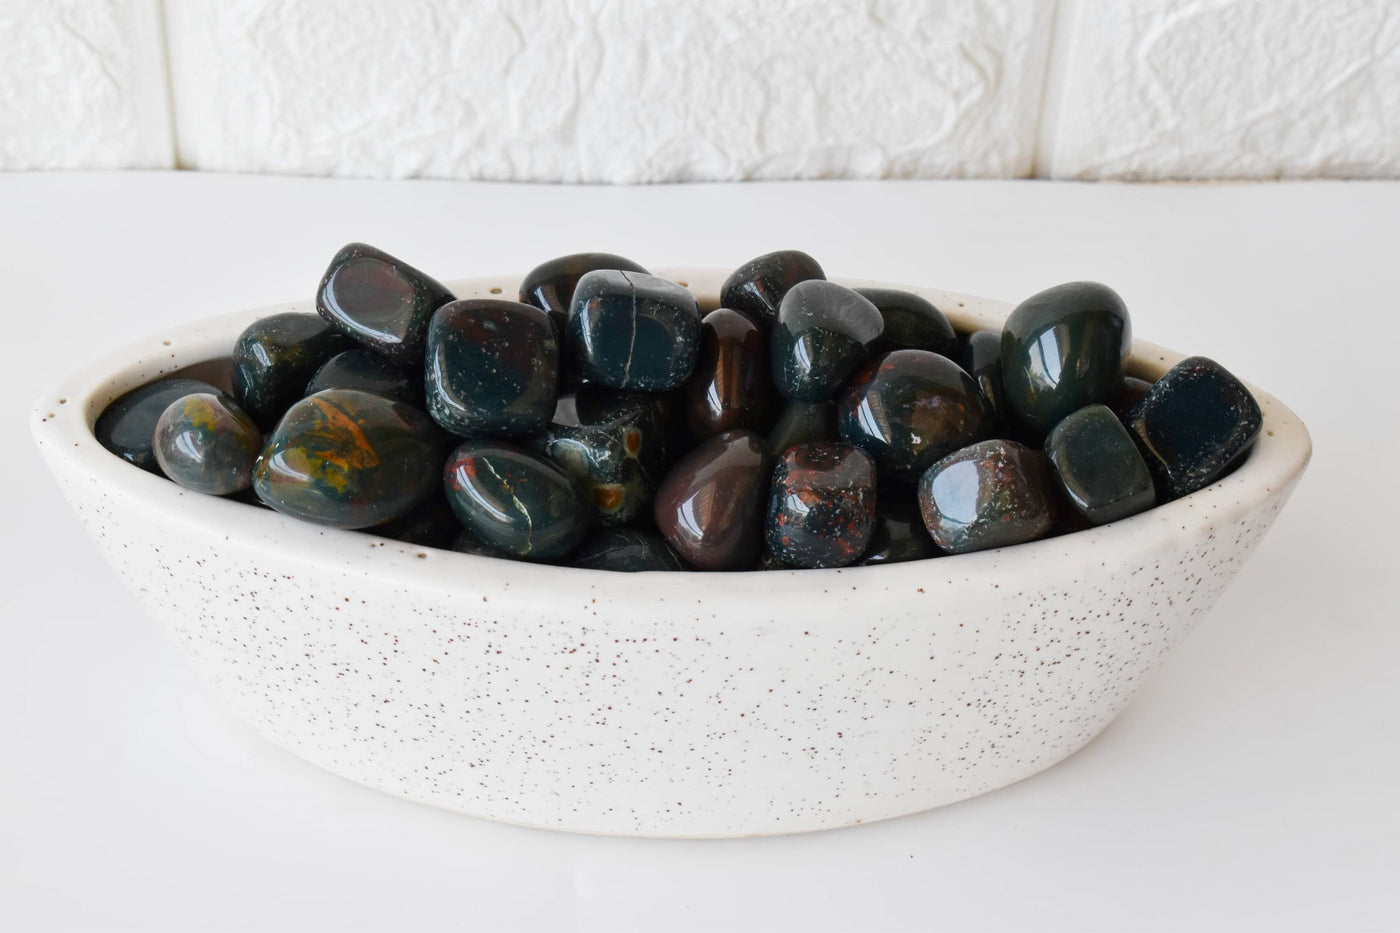 Bloodstone tumbled Crystals (Altruism and Cleansing)